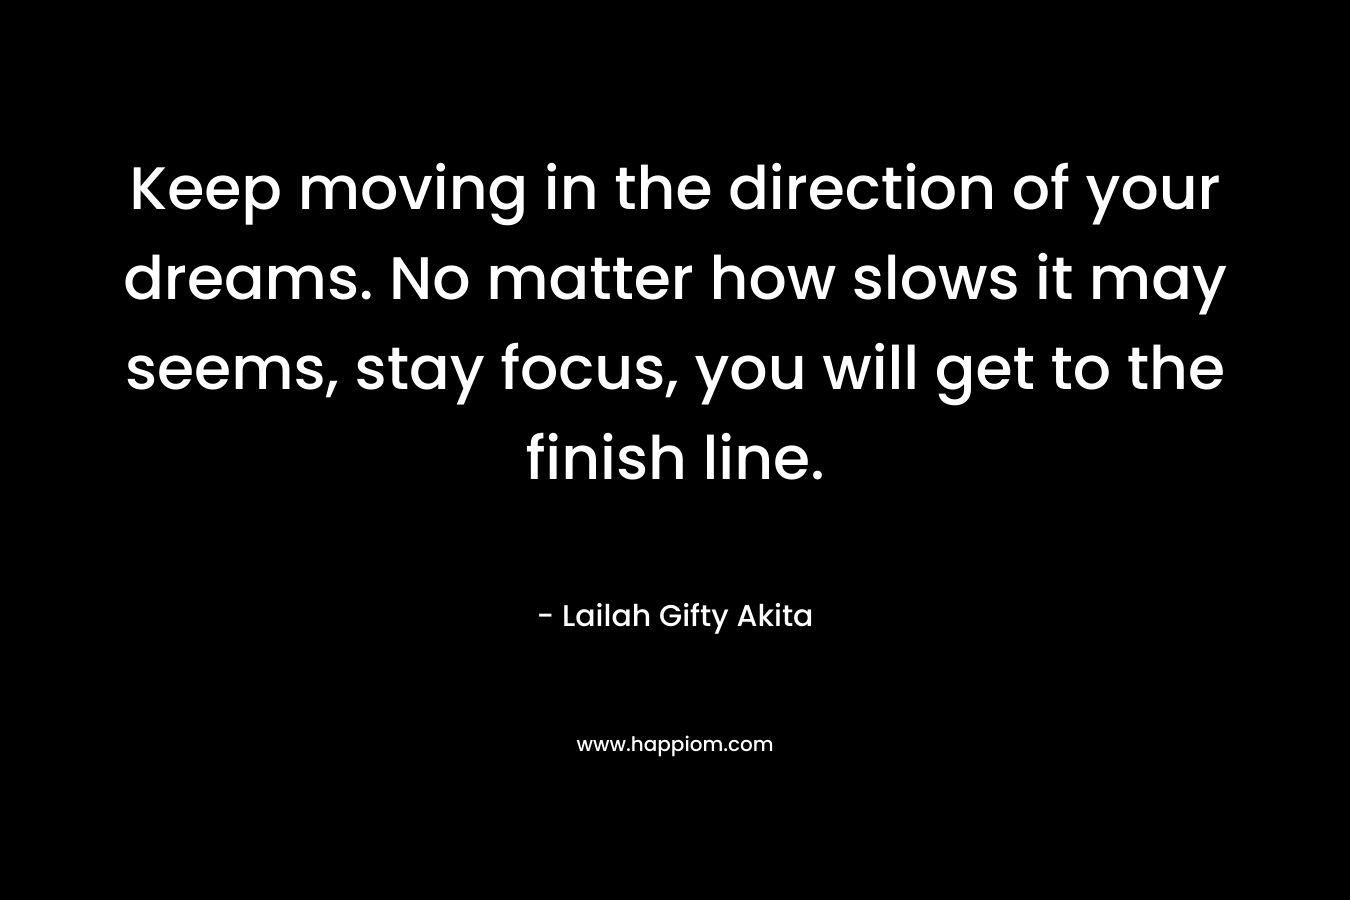 Keep moving in the direction of your dreams. No matter how slows it may seems, stay focus, you will get to the finish line.